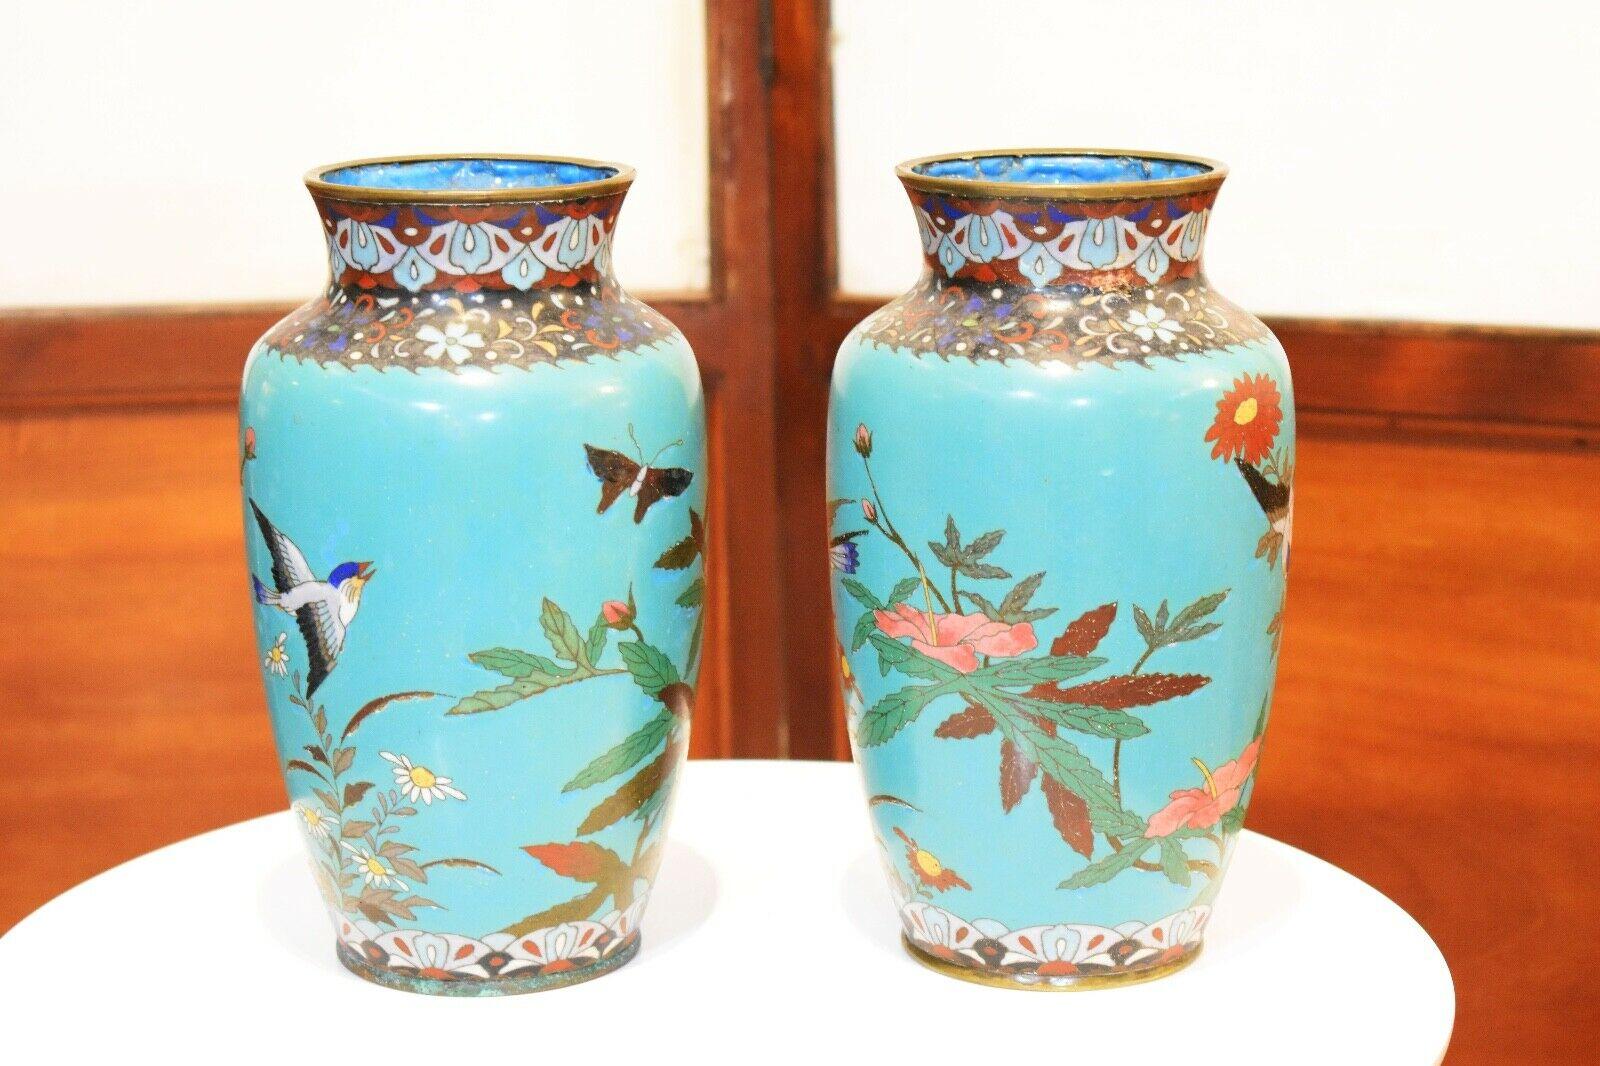 A beautiful pair of 19th century Japanese cloisonné vases

depicting a floral scene with birds on a turquoise color background. 

Very good antique condition, lovely patina and no chips or missing enamel.    
  